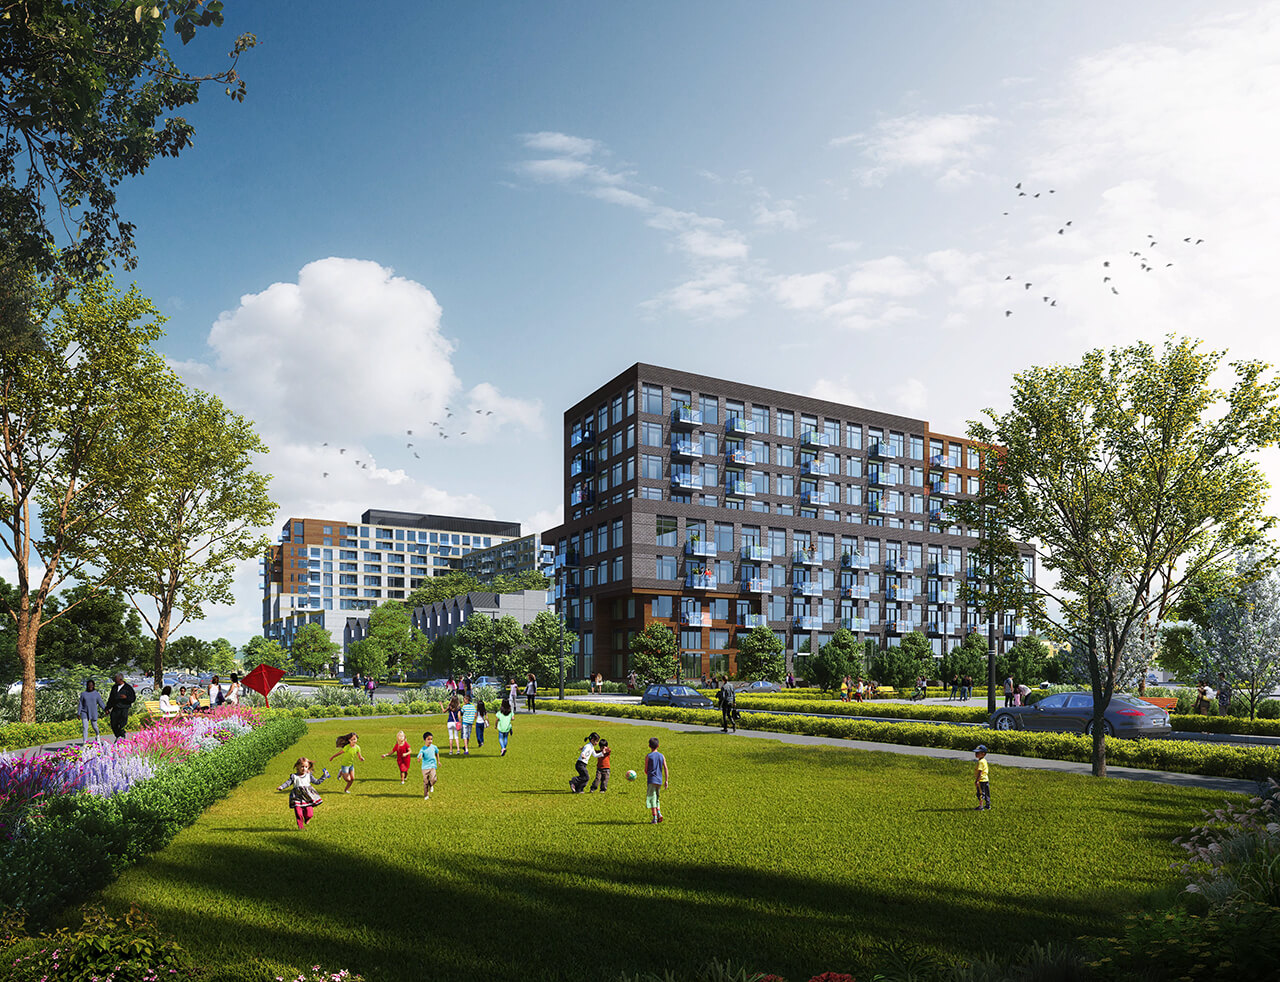 Rendering of Birchley Park Condos and Towns exterior of block 1 and 2 during the day